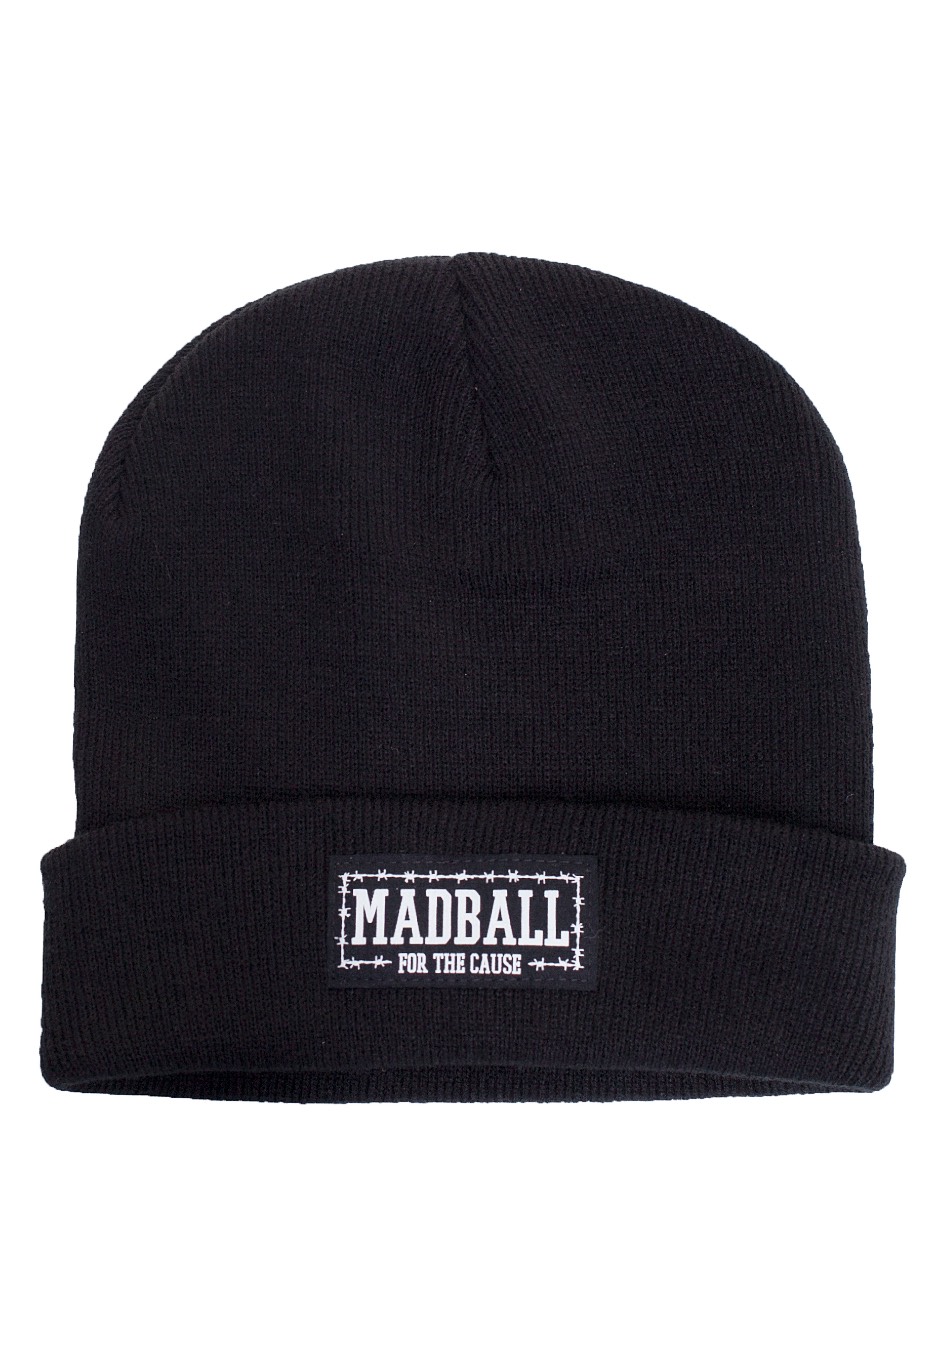 Madball - For The Cause Patch - Beanies